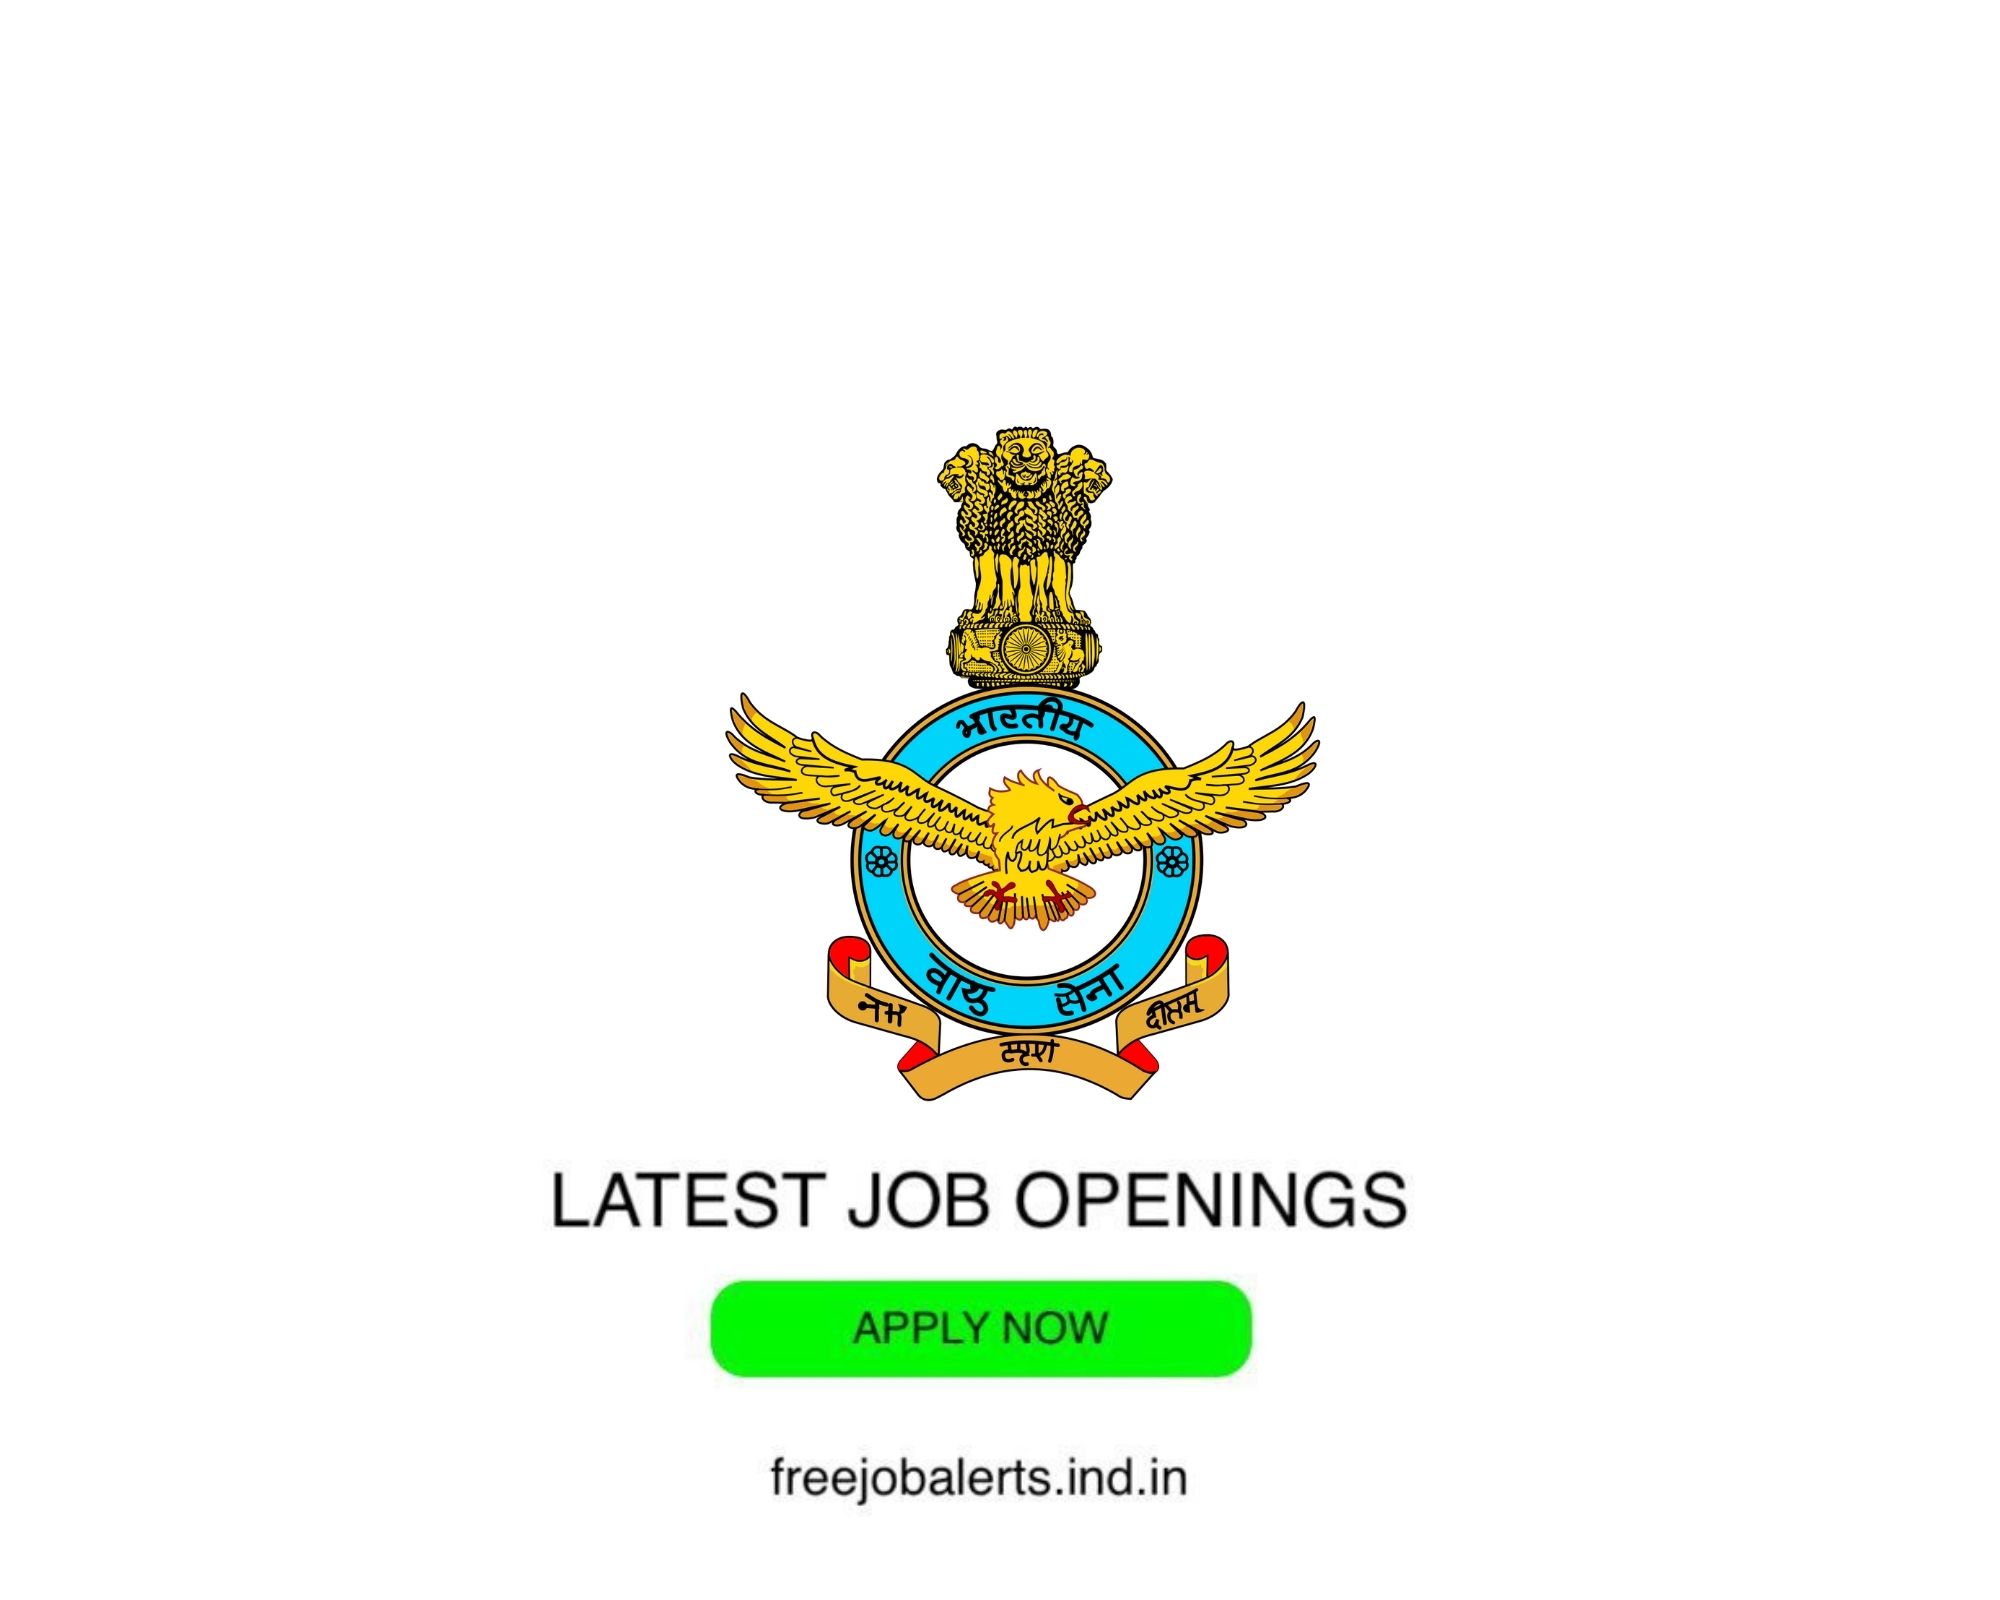 Indian Air Force- Latest Govt job openings - Free job alerts, Indian Govt Jobs